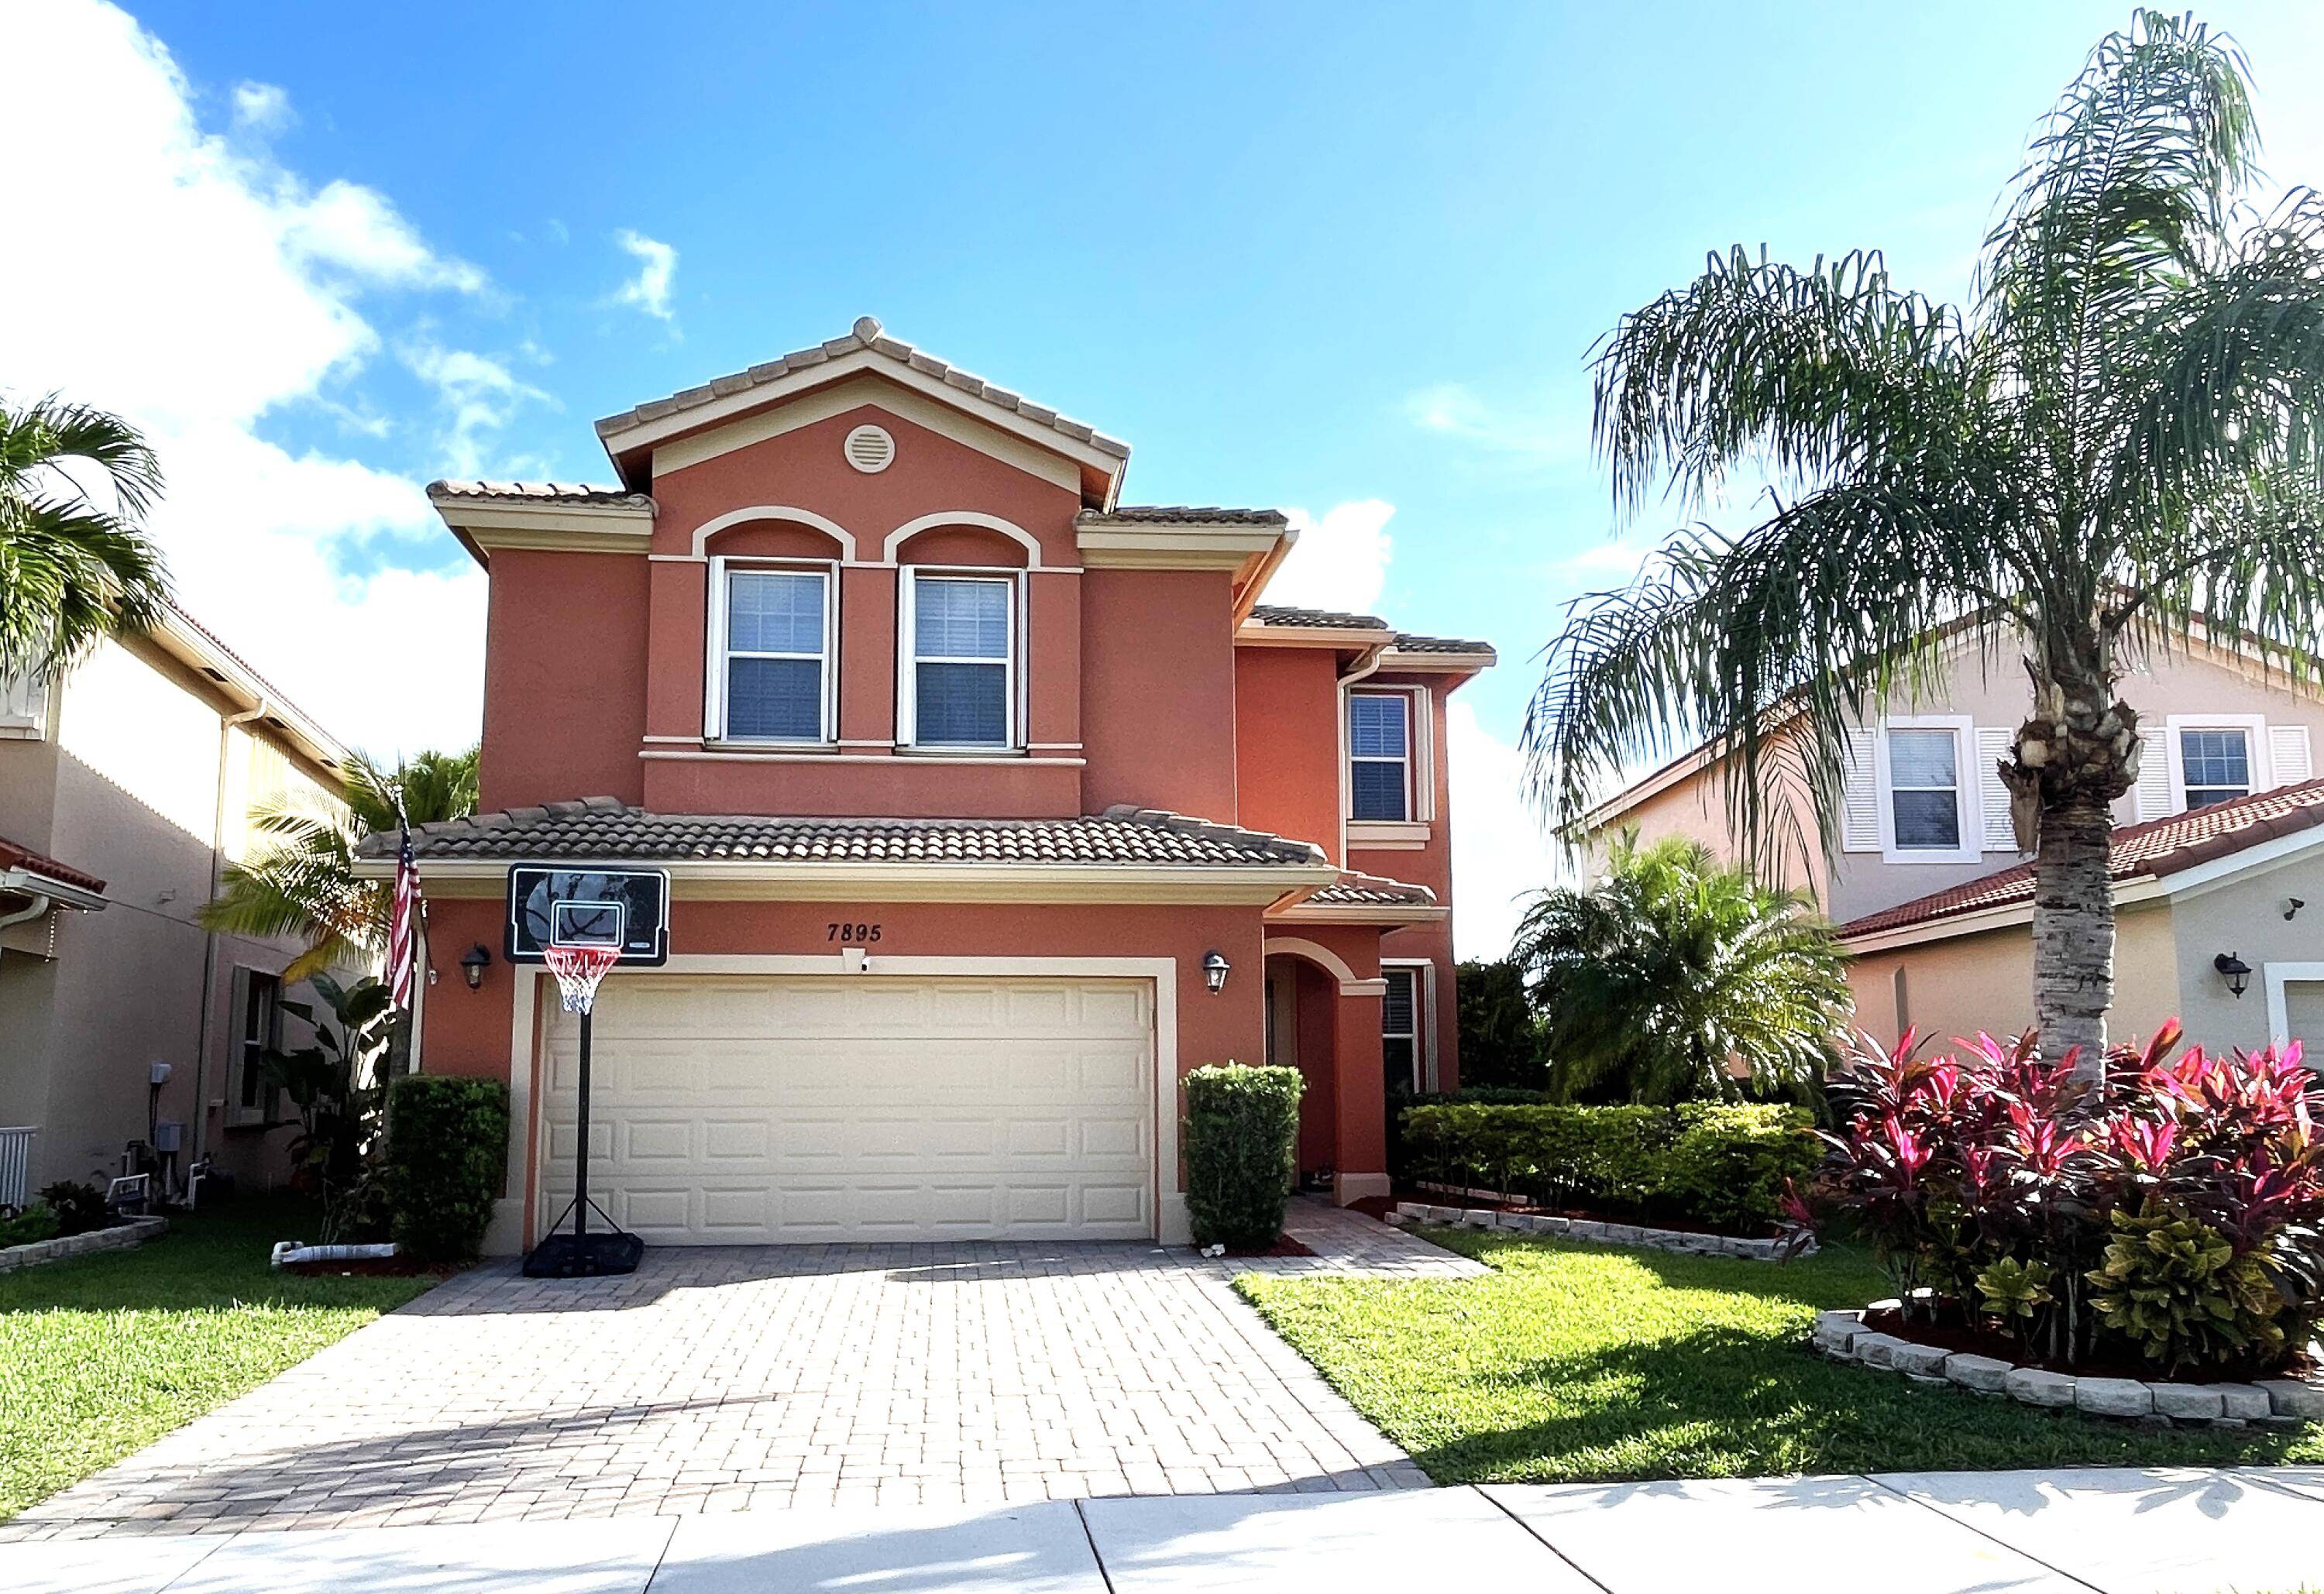 Beautiful 4 Beds 2. 5 Baths Two Story and fully screened Pool house in highly sought after ''The Oaks'' in Hobe Sound.